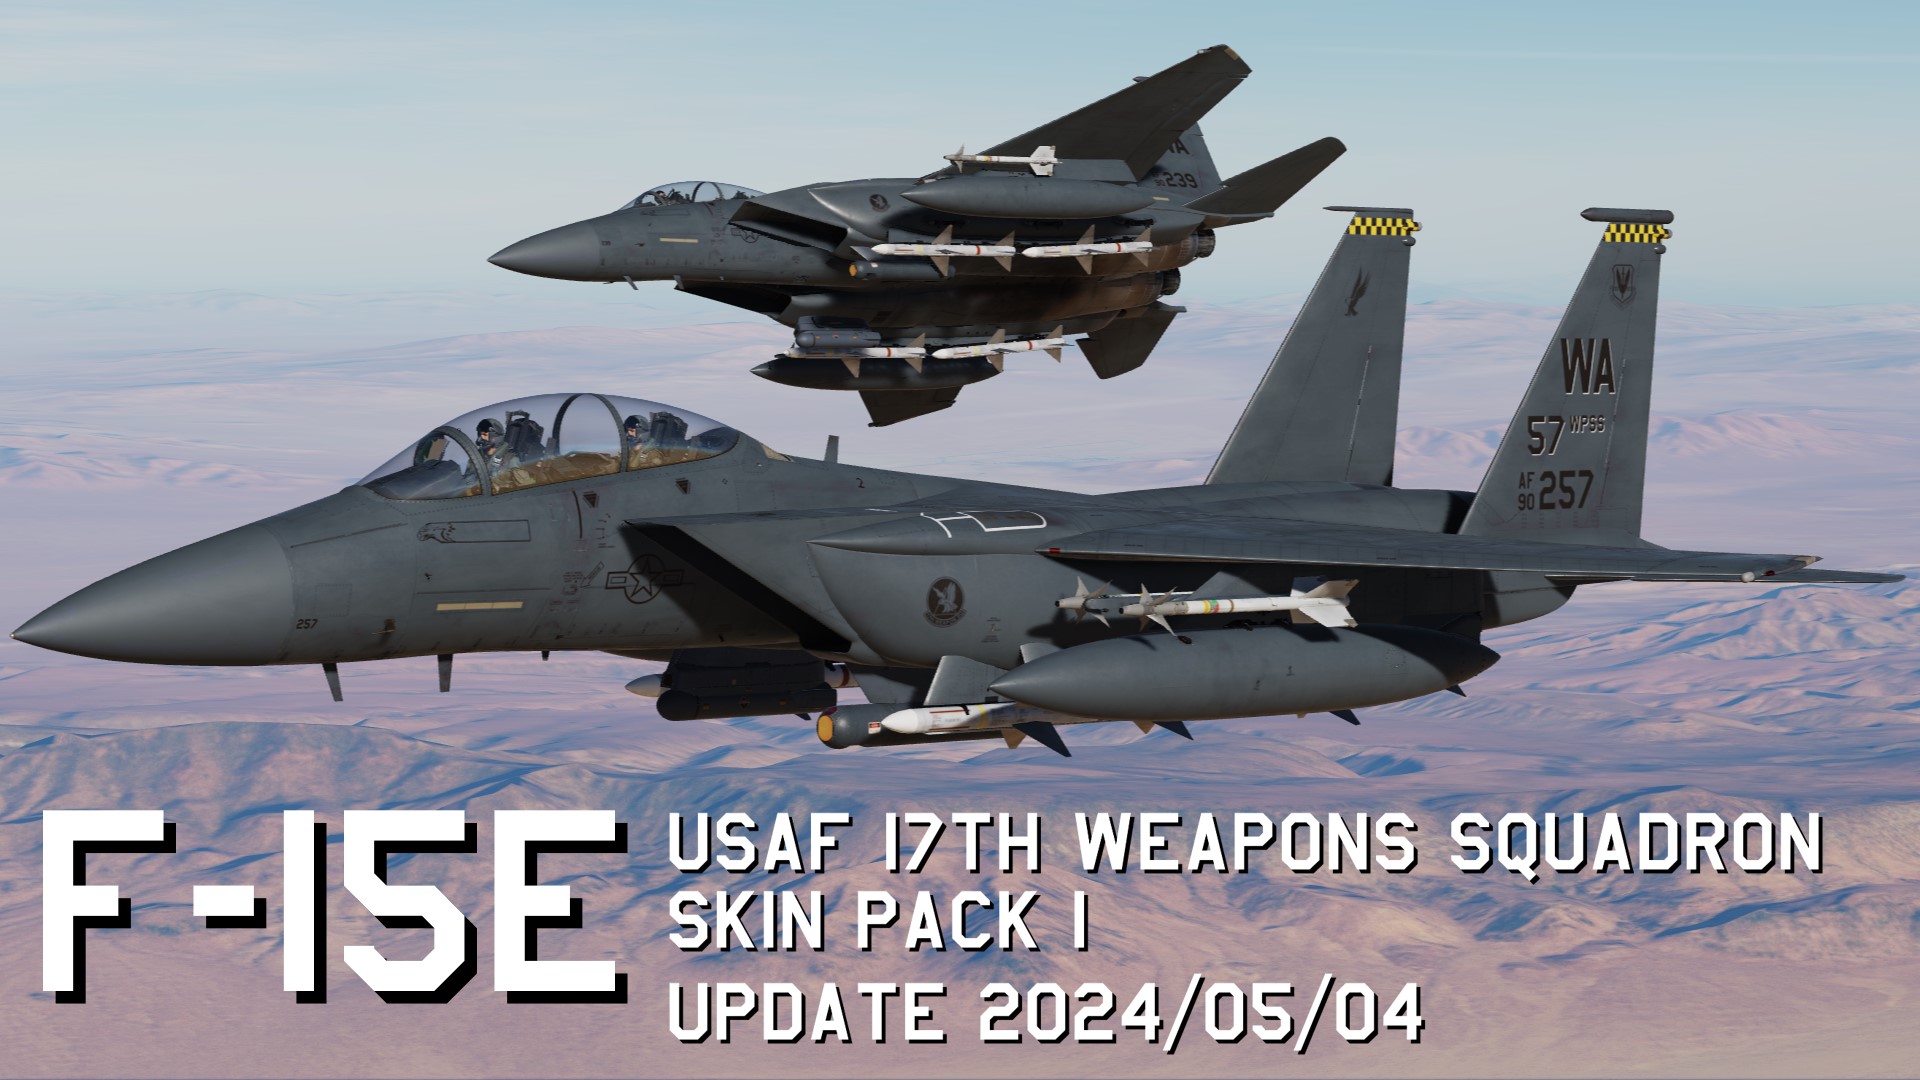 F-15E USAF 17th Weapons Squadron Skin Pack 1 update 2024/05/04